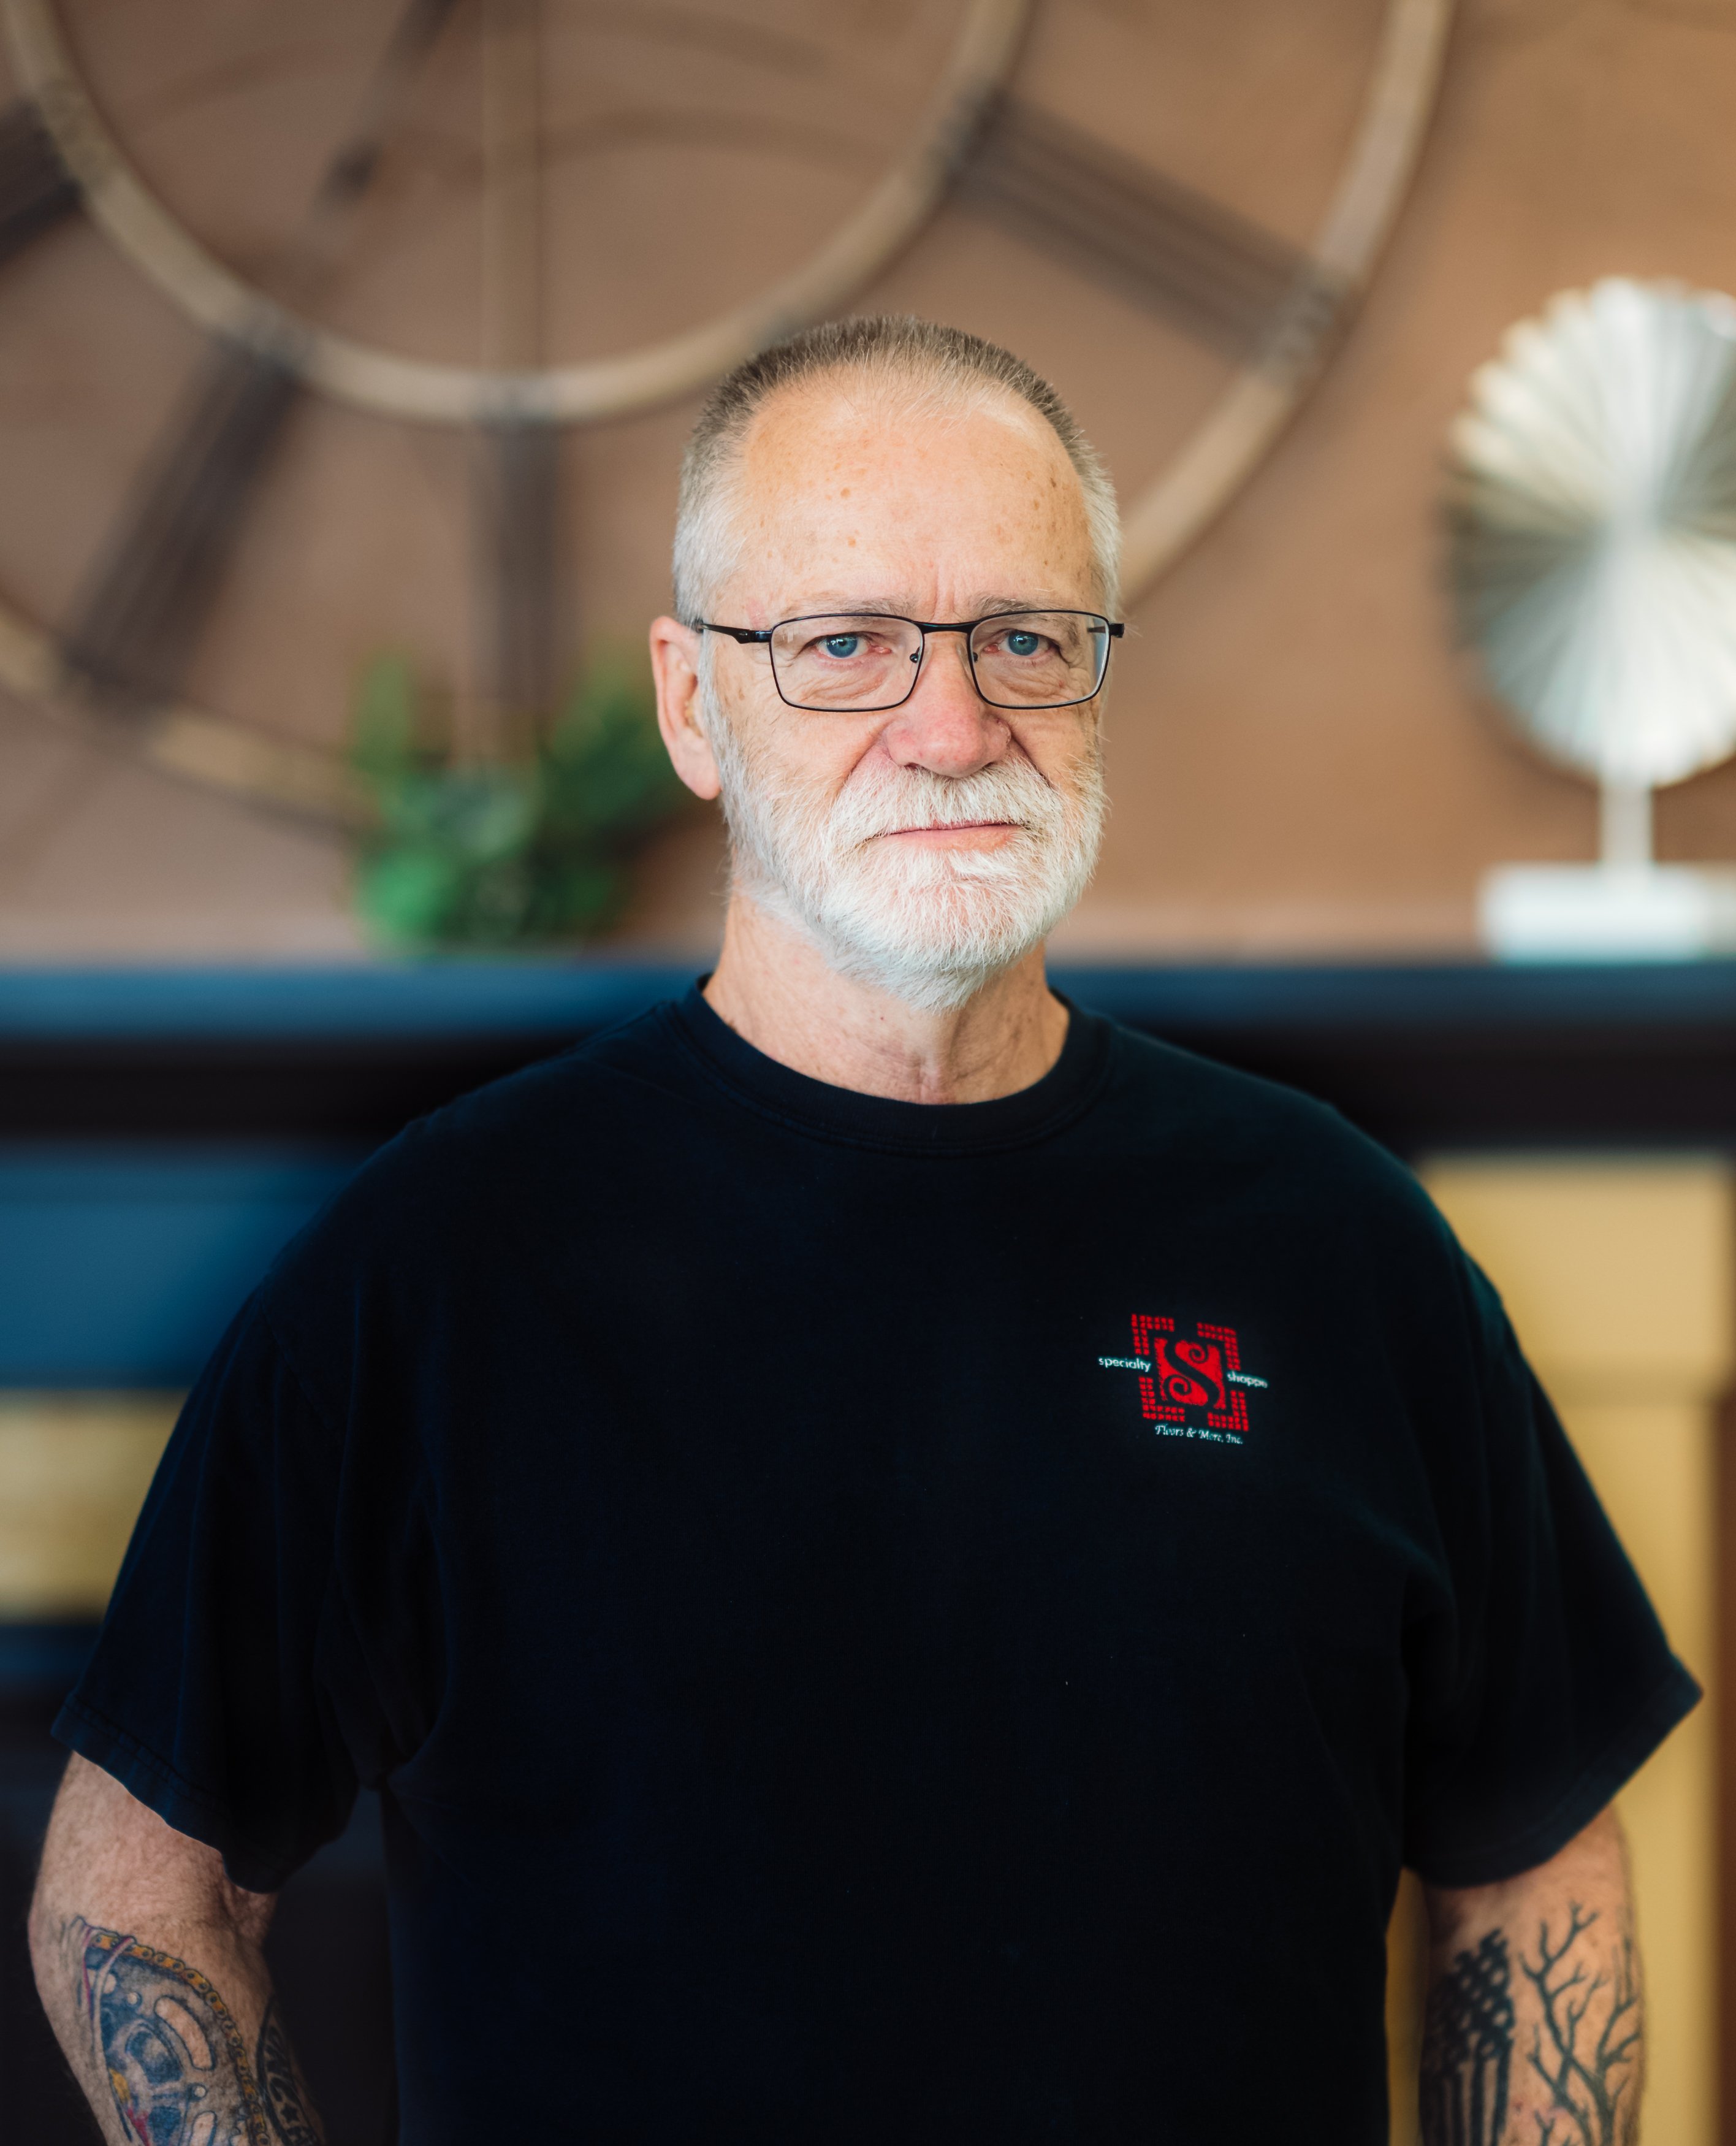 Jon, Co-owner, has been in the flooring industry for 40 years. He began as a carpet installer and still believes installations should be done the good old-fashioned way with power stretches. He expects perfection from all our subcontractors and will not s